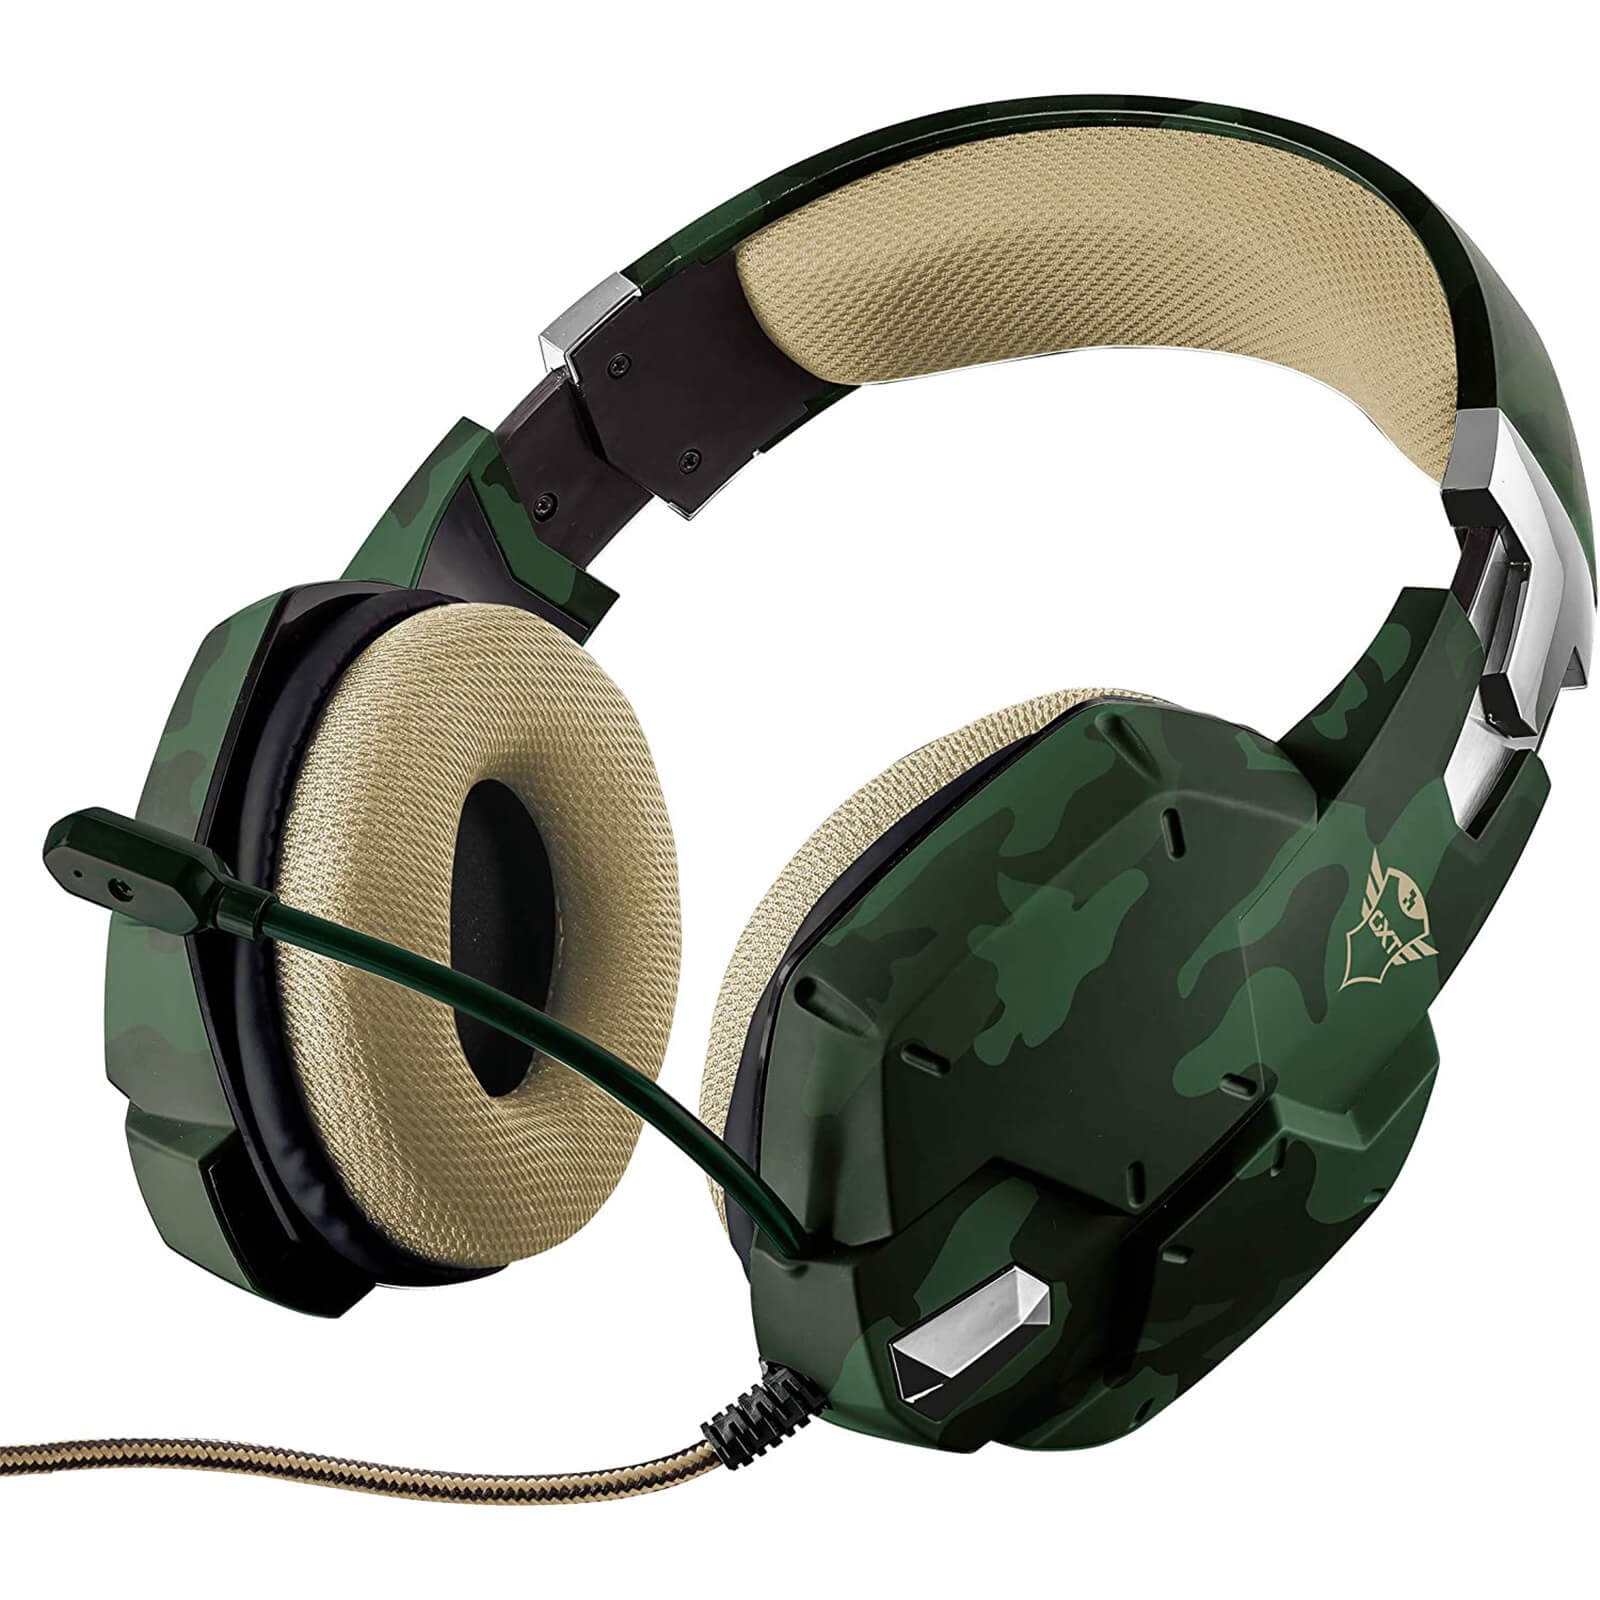 Trust Gaming GXT 322 Carus Gaming Headset for PC, Laptop, PS4 and Xbox One - Jungle Camo